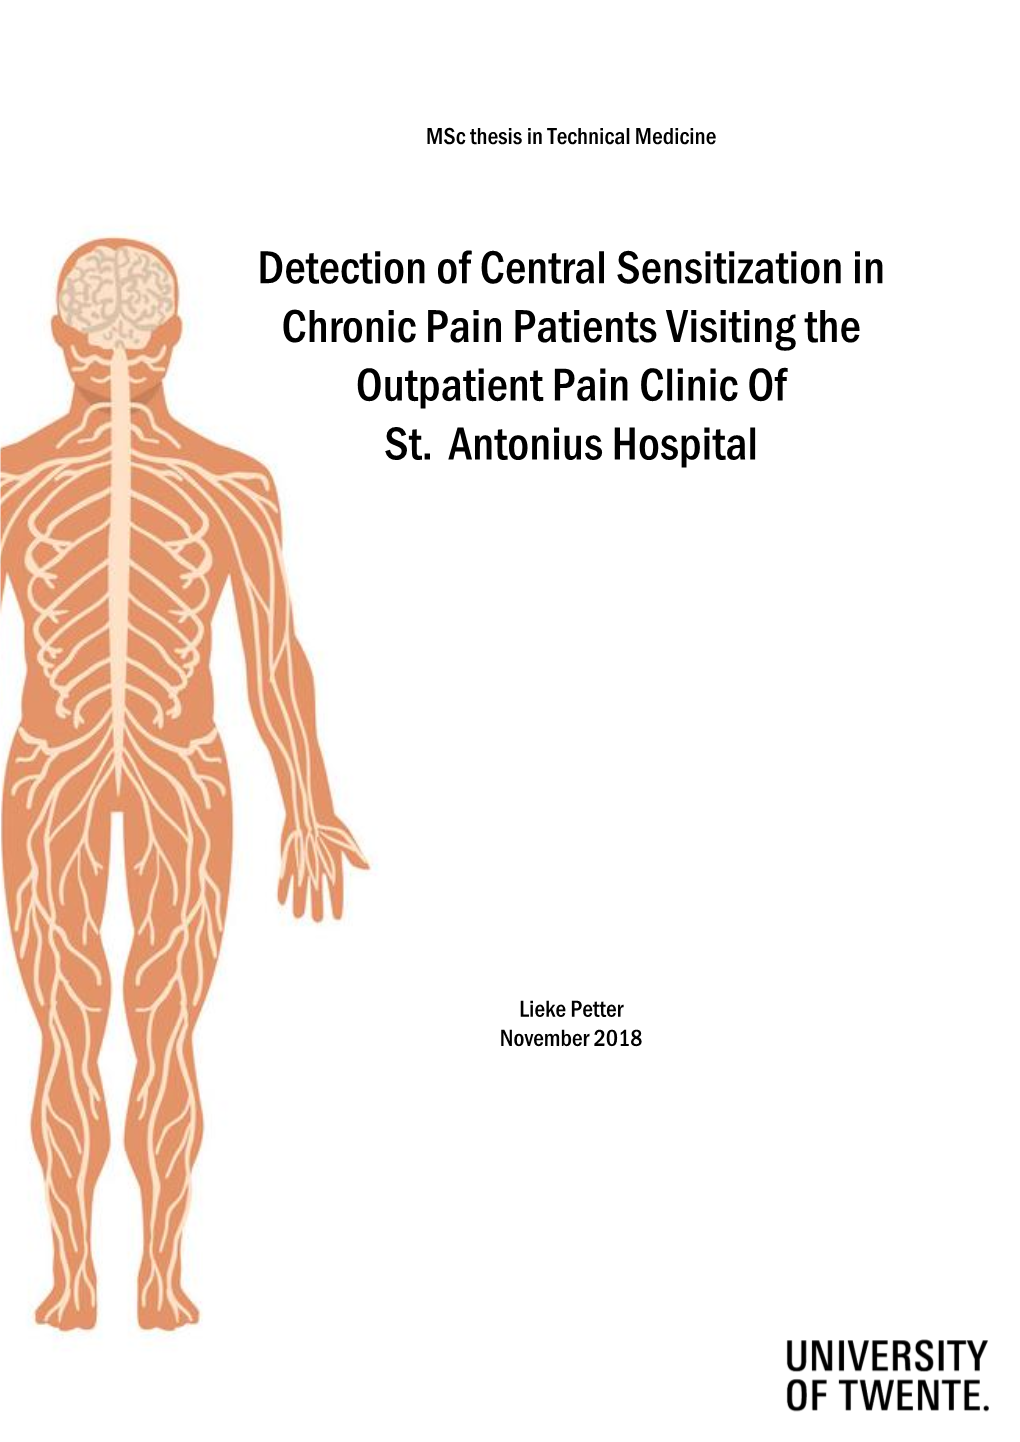 Detection of Central Sensitization in Chronic Pain Patients Visiting the Outpatient Pain Clinic of St